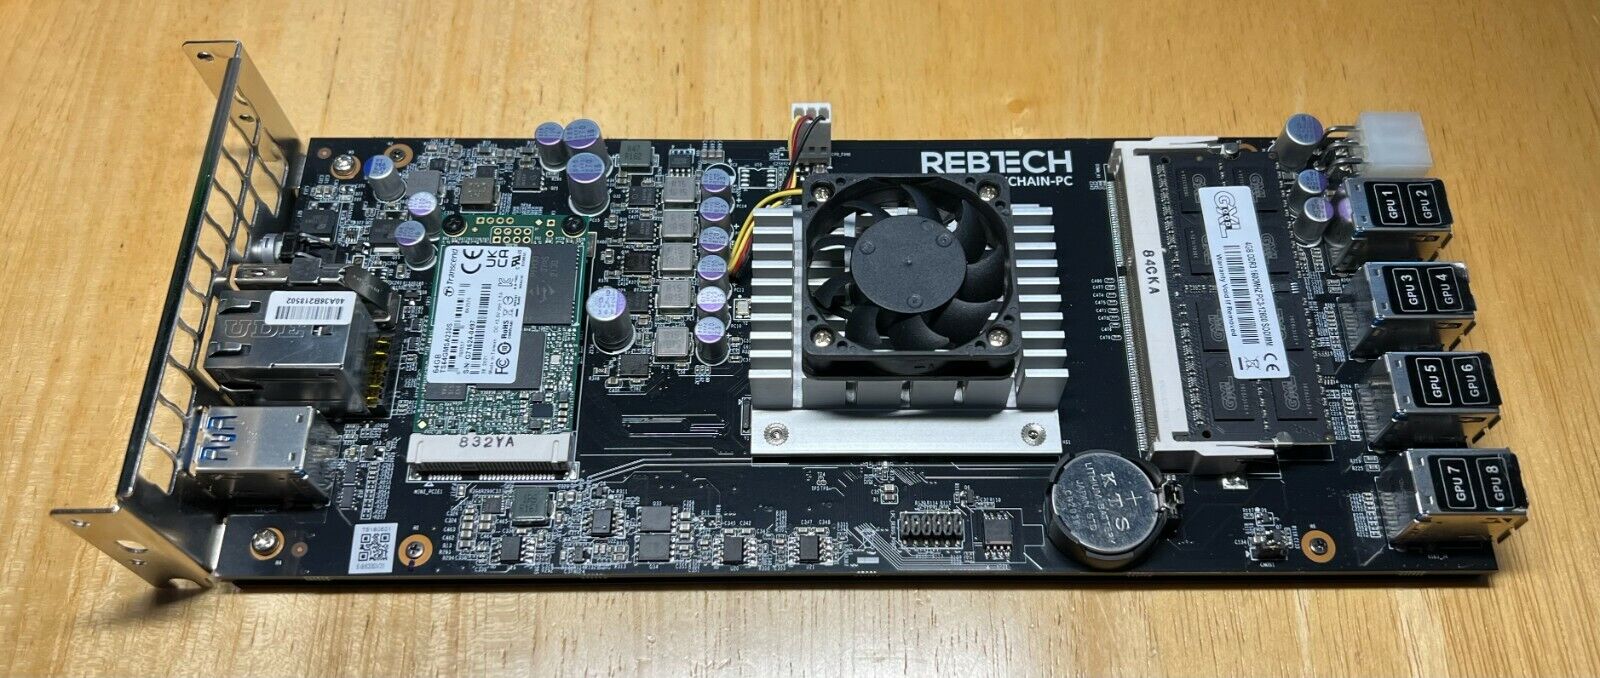 Rebtech 8 GPU Mining Motherboard PC with RAM and SSD Included  Plug & Play